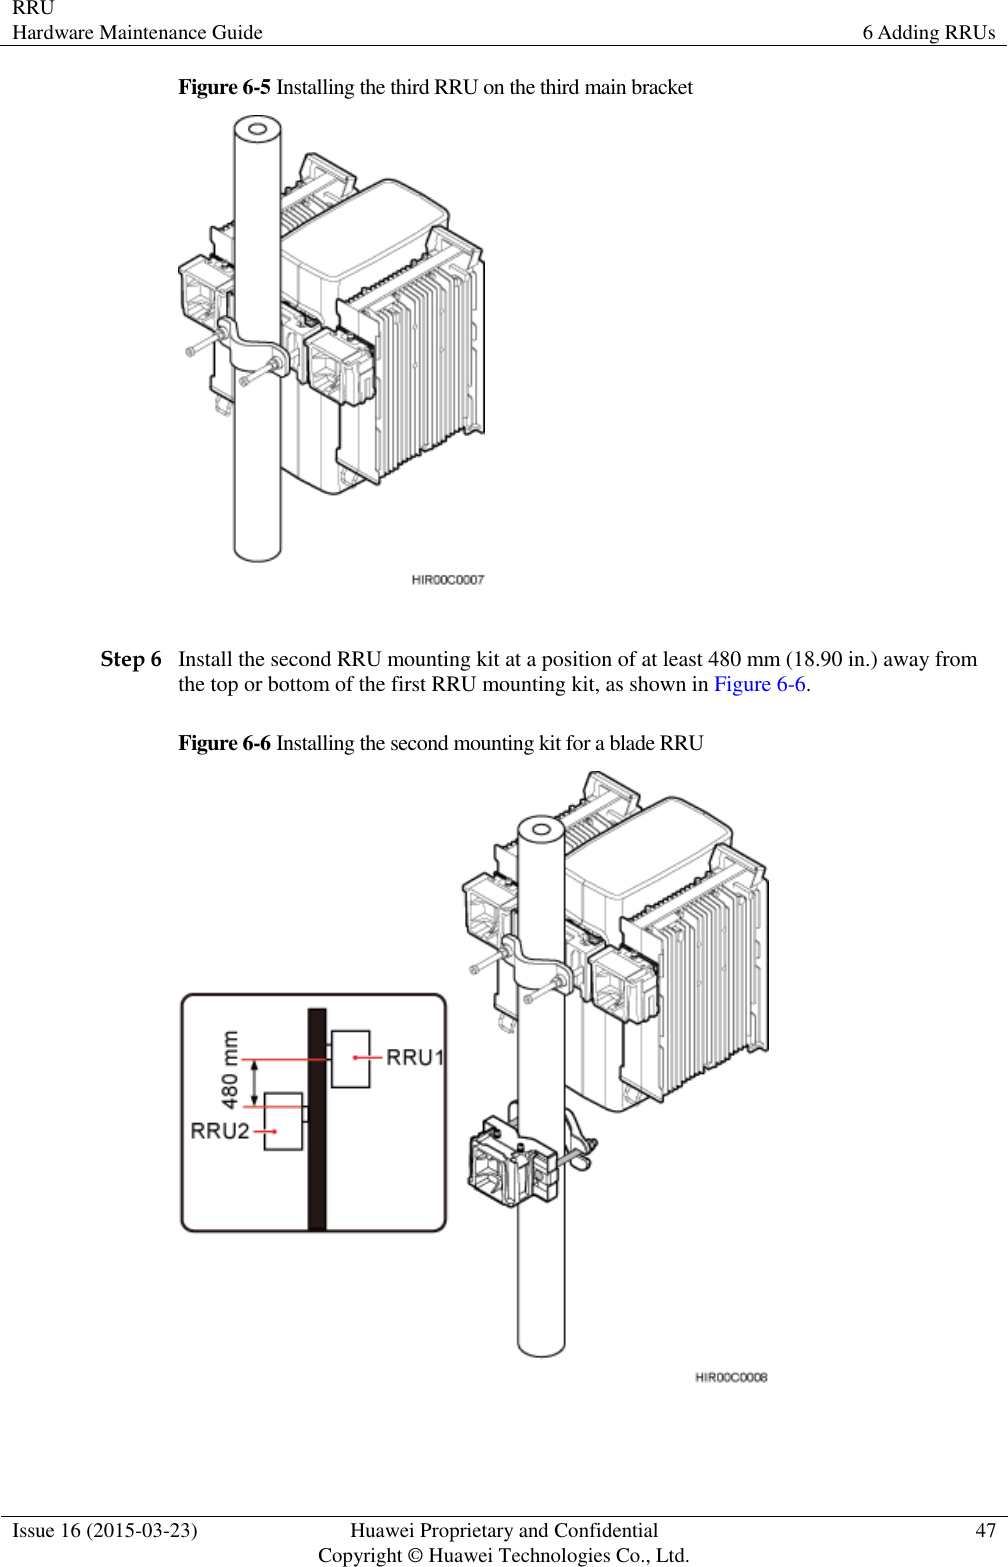 RRU Hardware Maintenance Guide 6 Adding RRUs  Issue 16 (2015-03-23) Huawei Proprietary and Confidential                                     Copyright © Huawei Technologies Co., Ltd. 47  Figure 6-5 Installing the third RRU on the third main bracket   Step 6 Install the second RRU mounting kit at a position of at least 480 mm (18.90 in.) away from the top or bottom of the first RRU mounting kit, as shown in Figure 6-6. Figure 6-6 Installing the second mounting kit for a blade RRU   